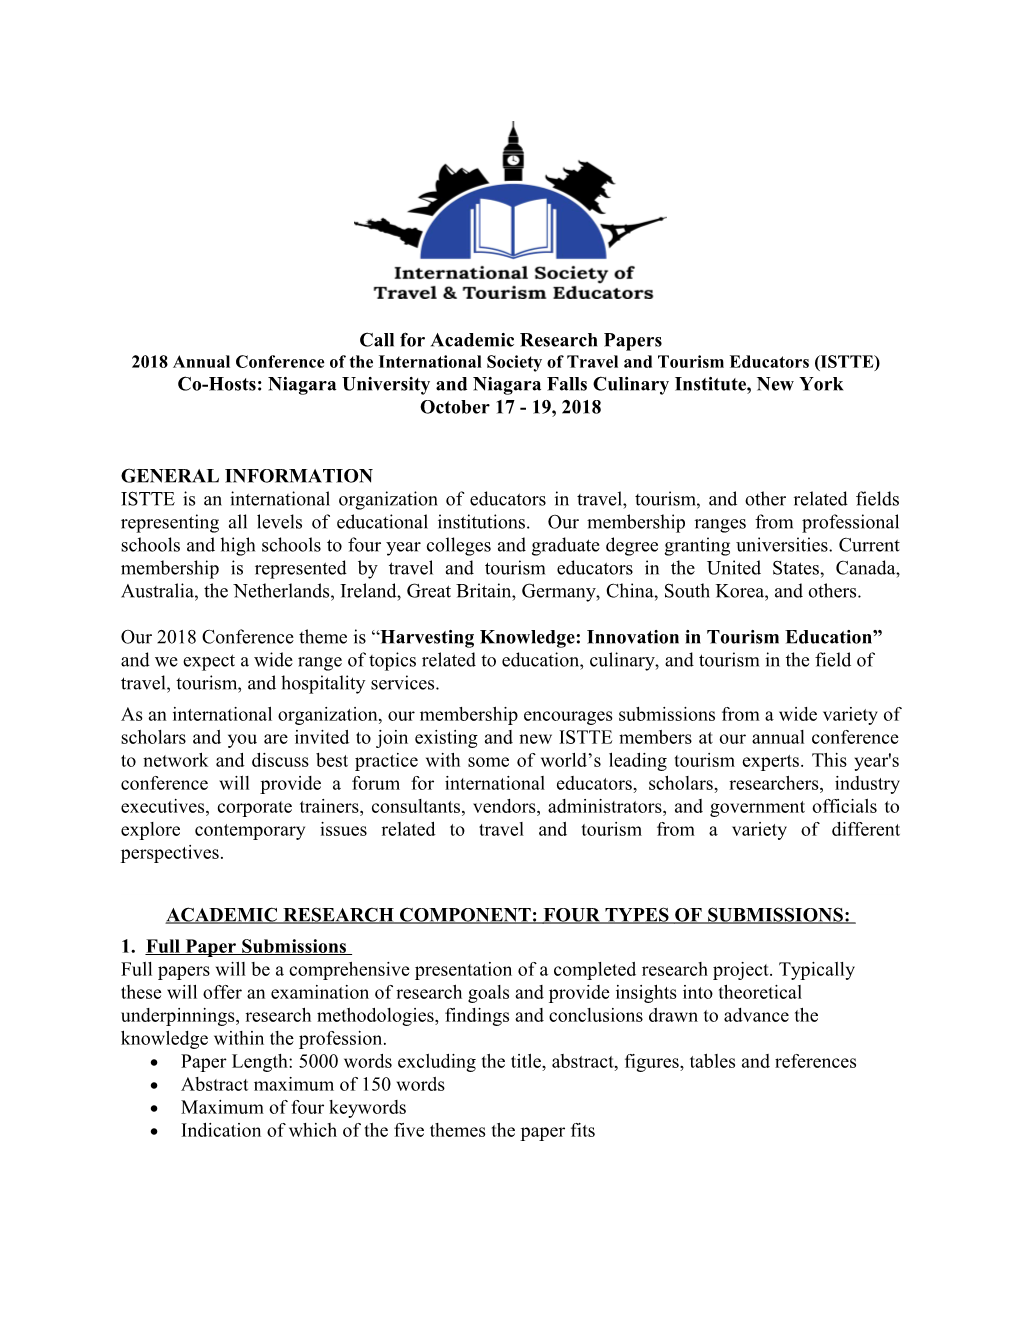 Call for Academic Research Papers